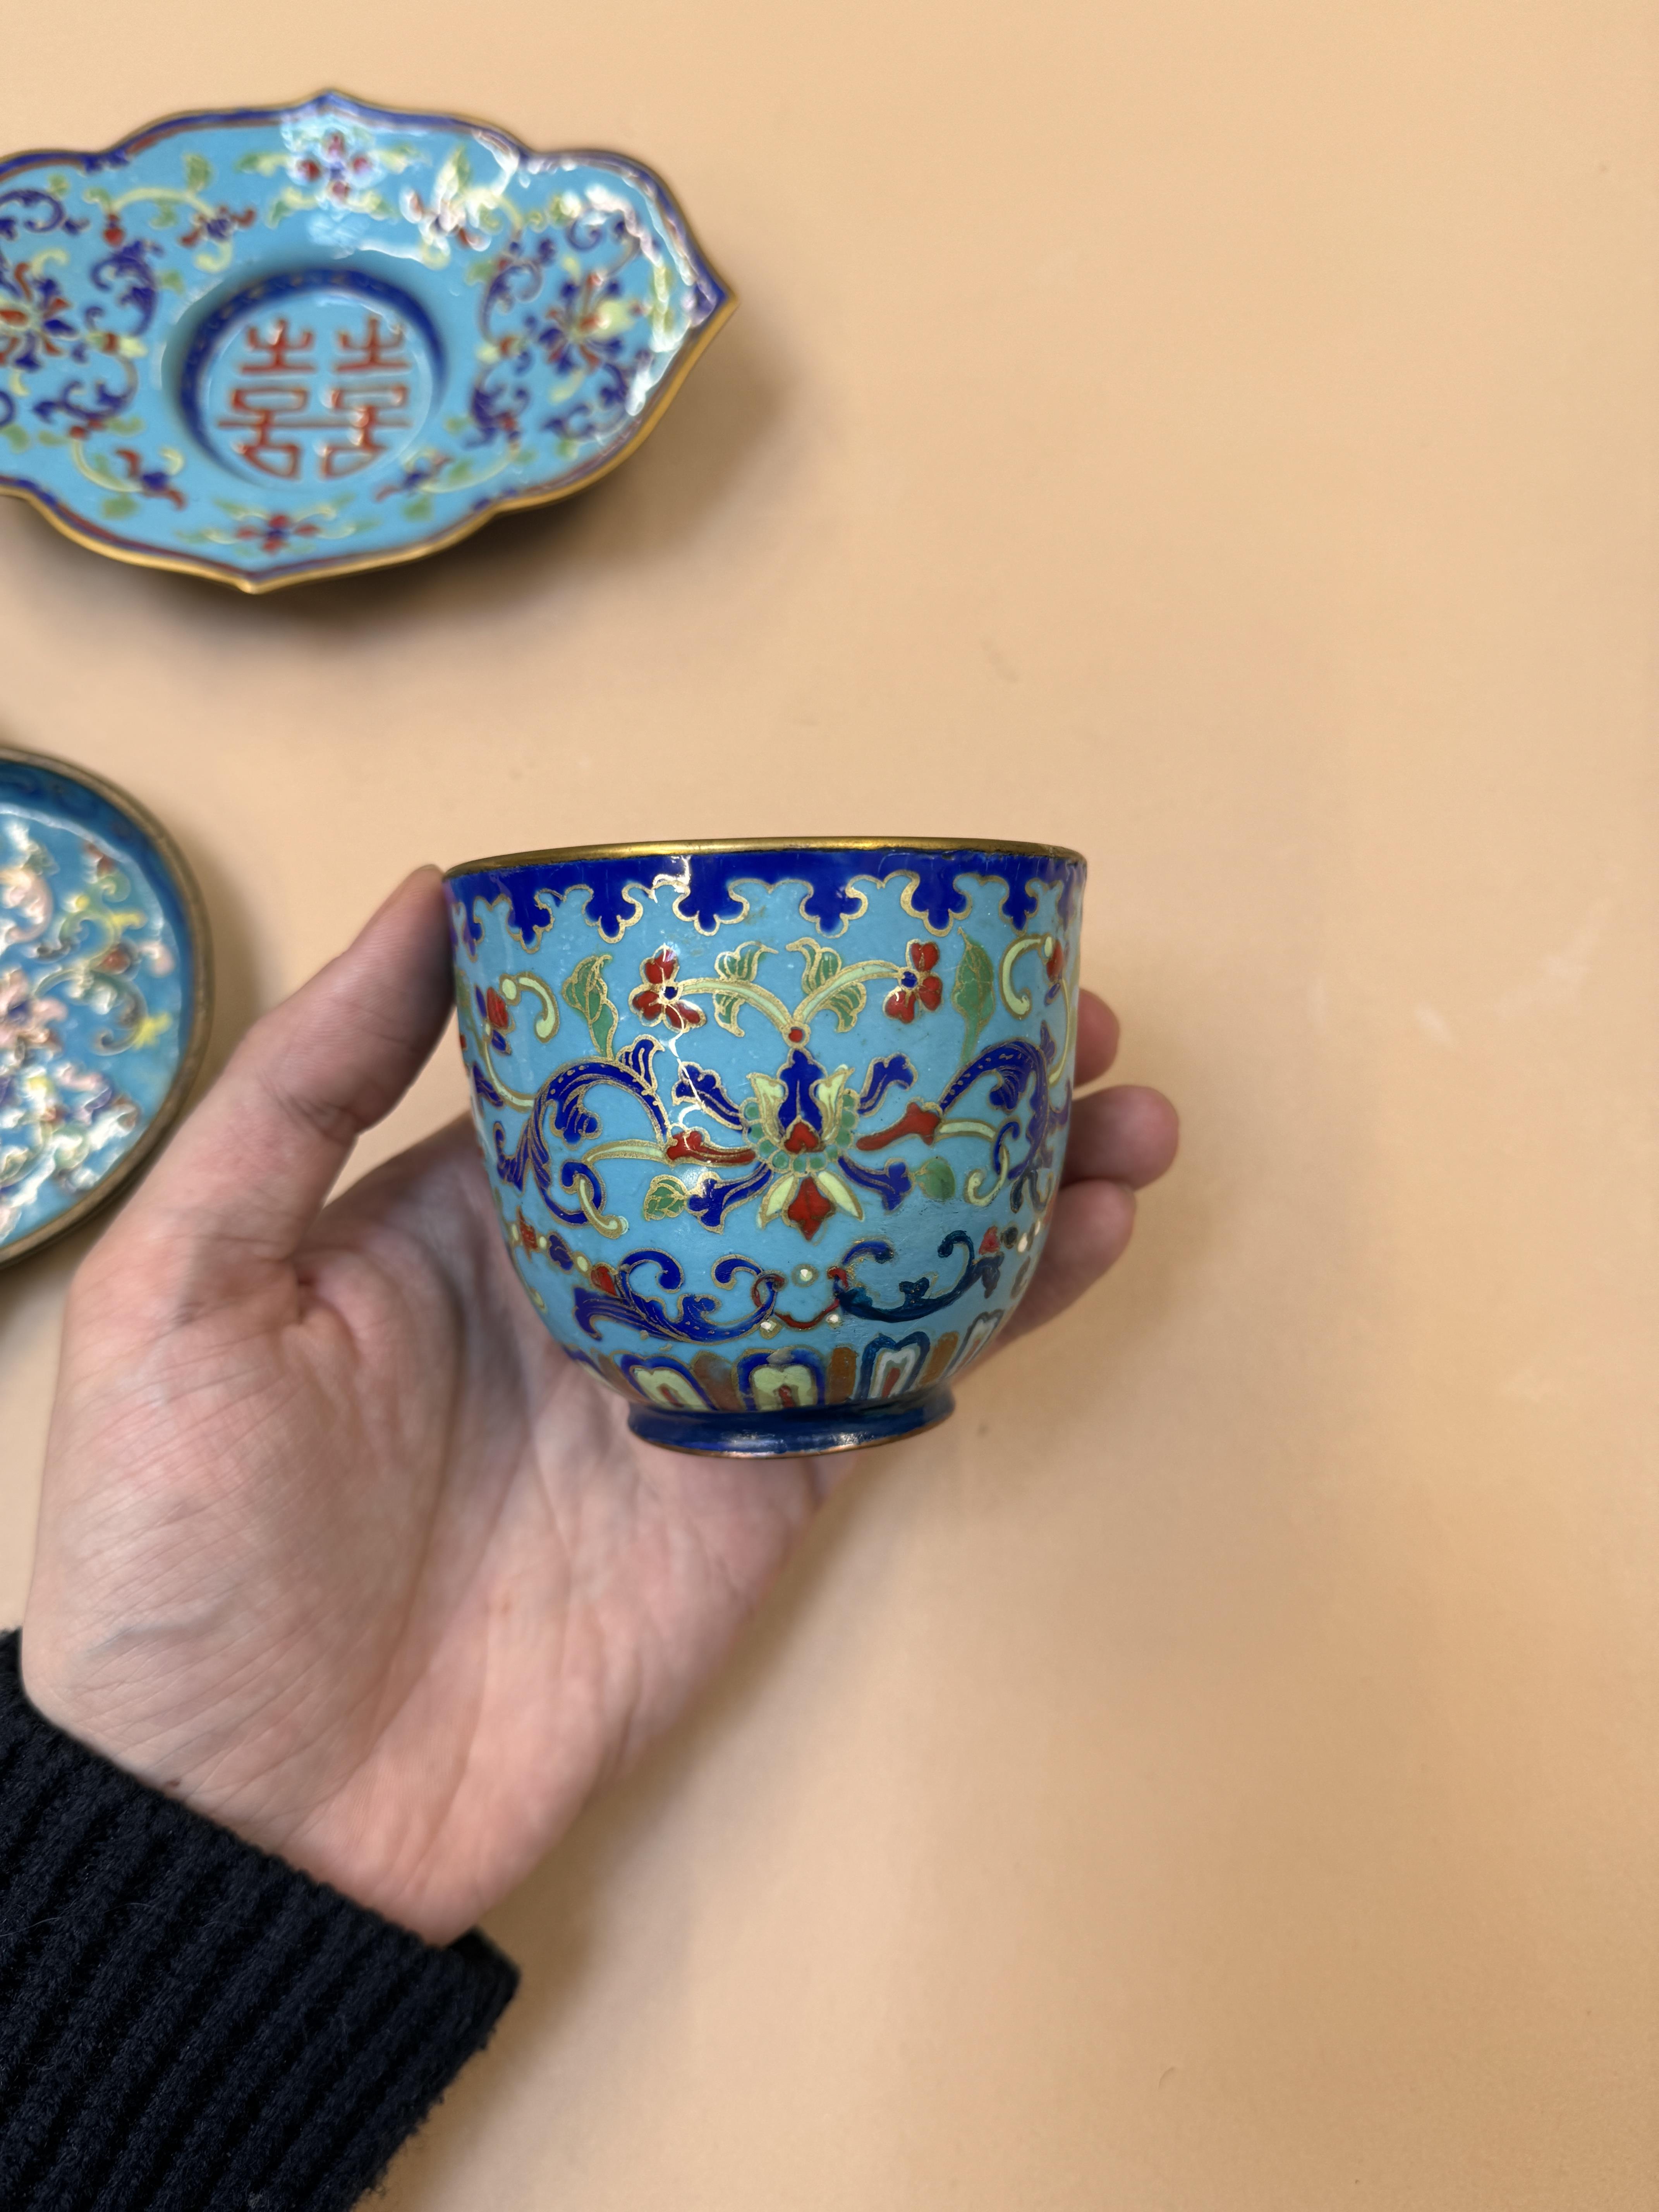 A CHINESE CANTON ENAMEL CUP, STAND AND DISH 清十九世紀 廣東銅胎畫琺瑯「壽」盤及「囍」盃及盤 - Image 23 of 31